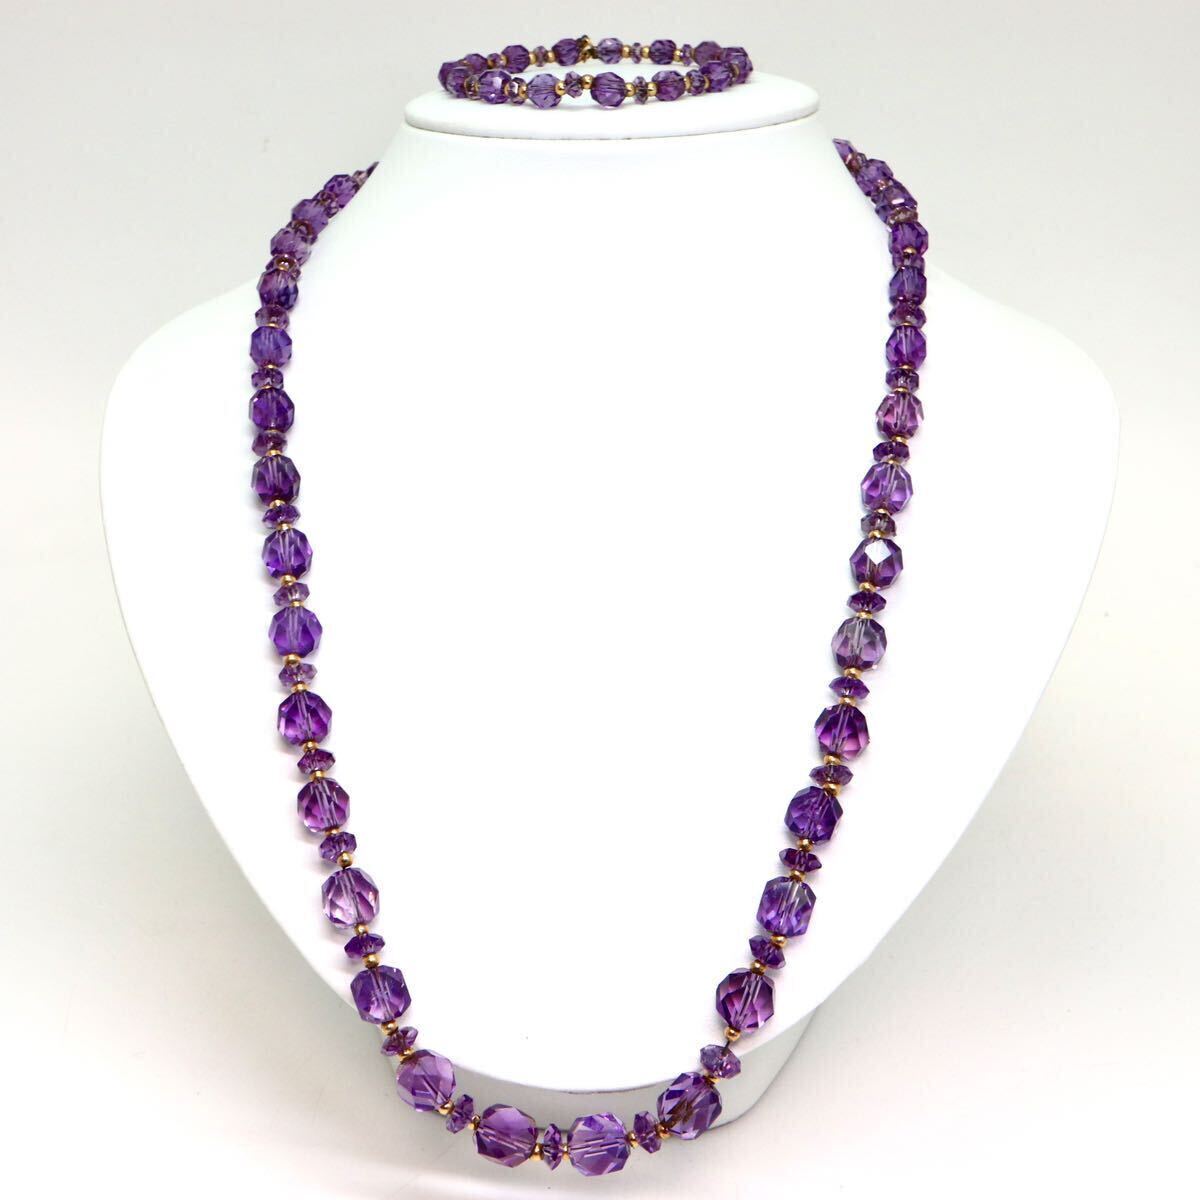 《K18/K14 天然アメジストネックレス&ブレスレット》M 約51.4g 約60.5/21cm 約10mm珠 amethyst necklace ジュエリー jewelry DI0/EA2_画像2